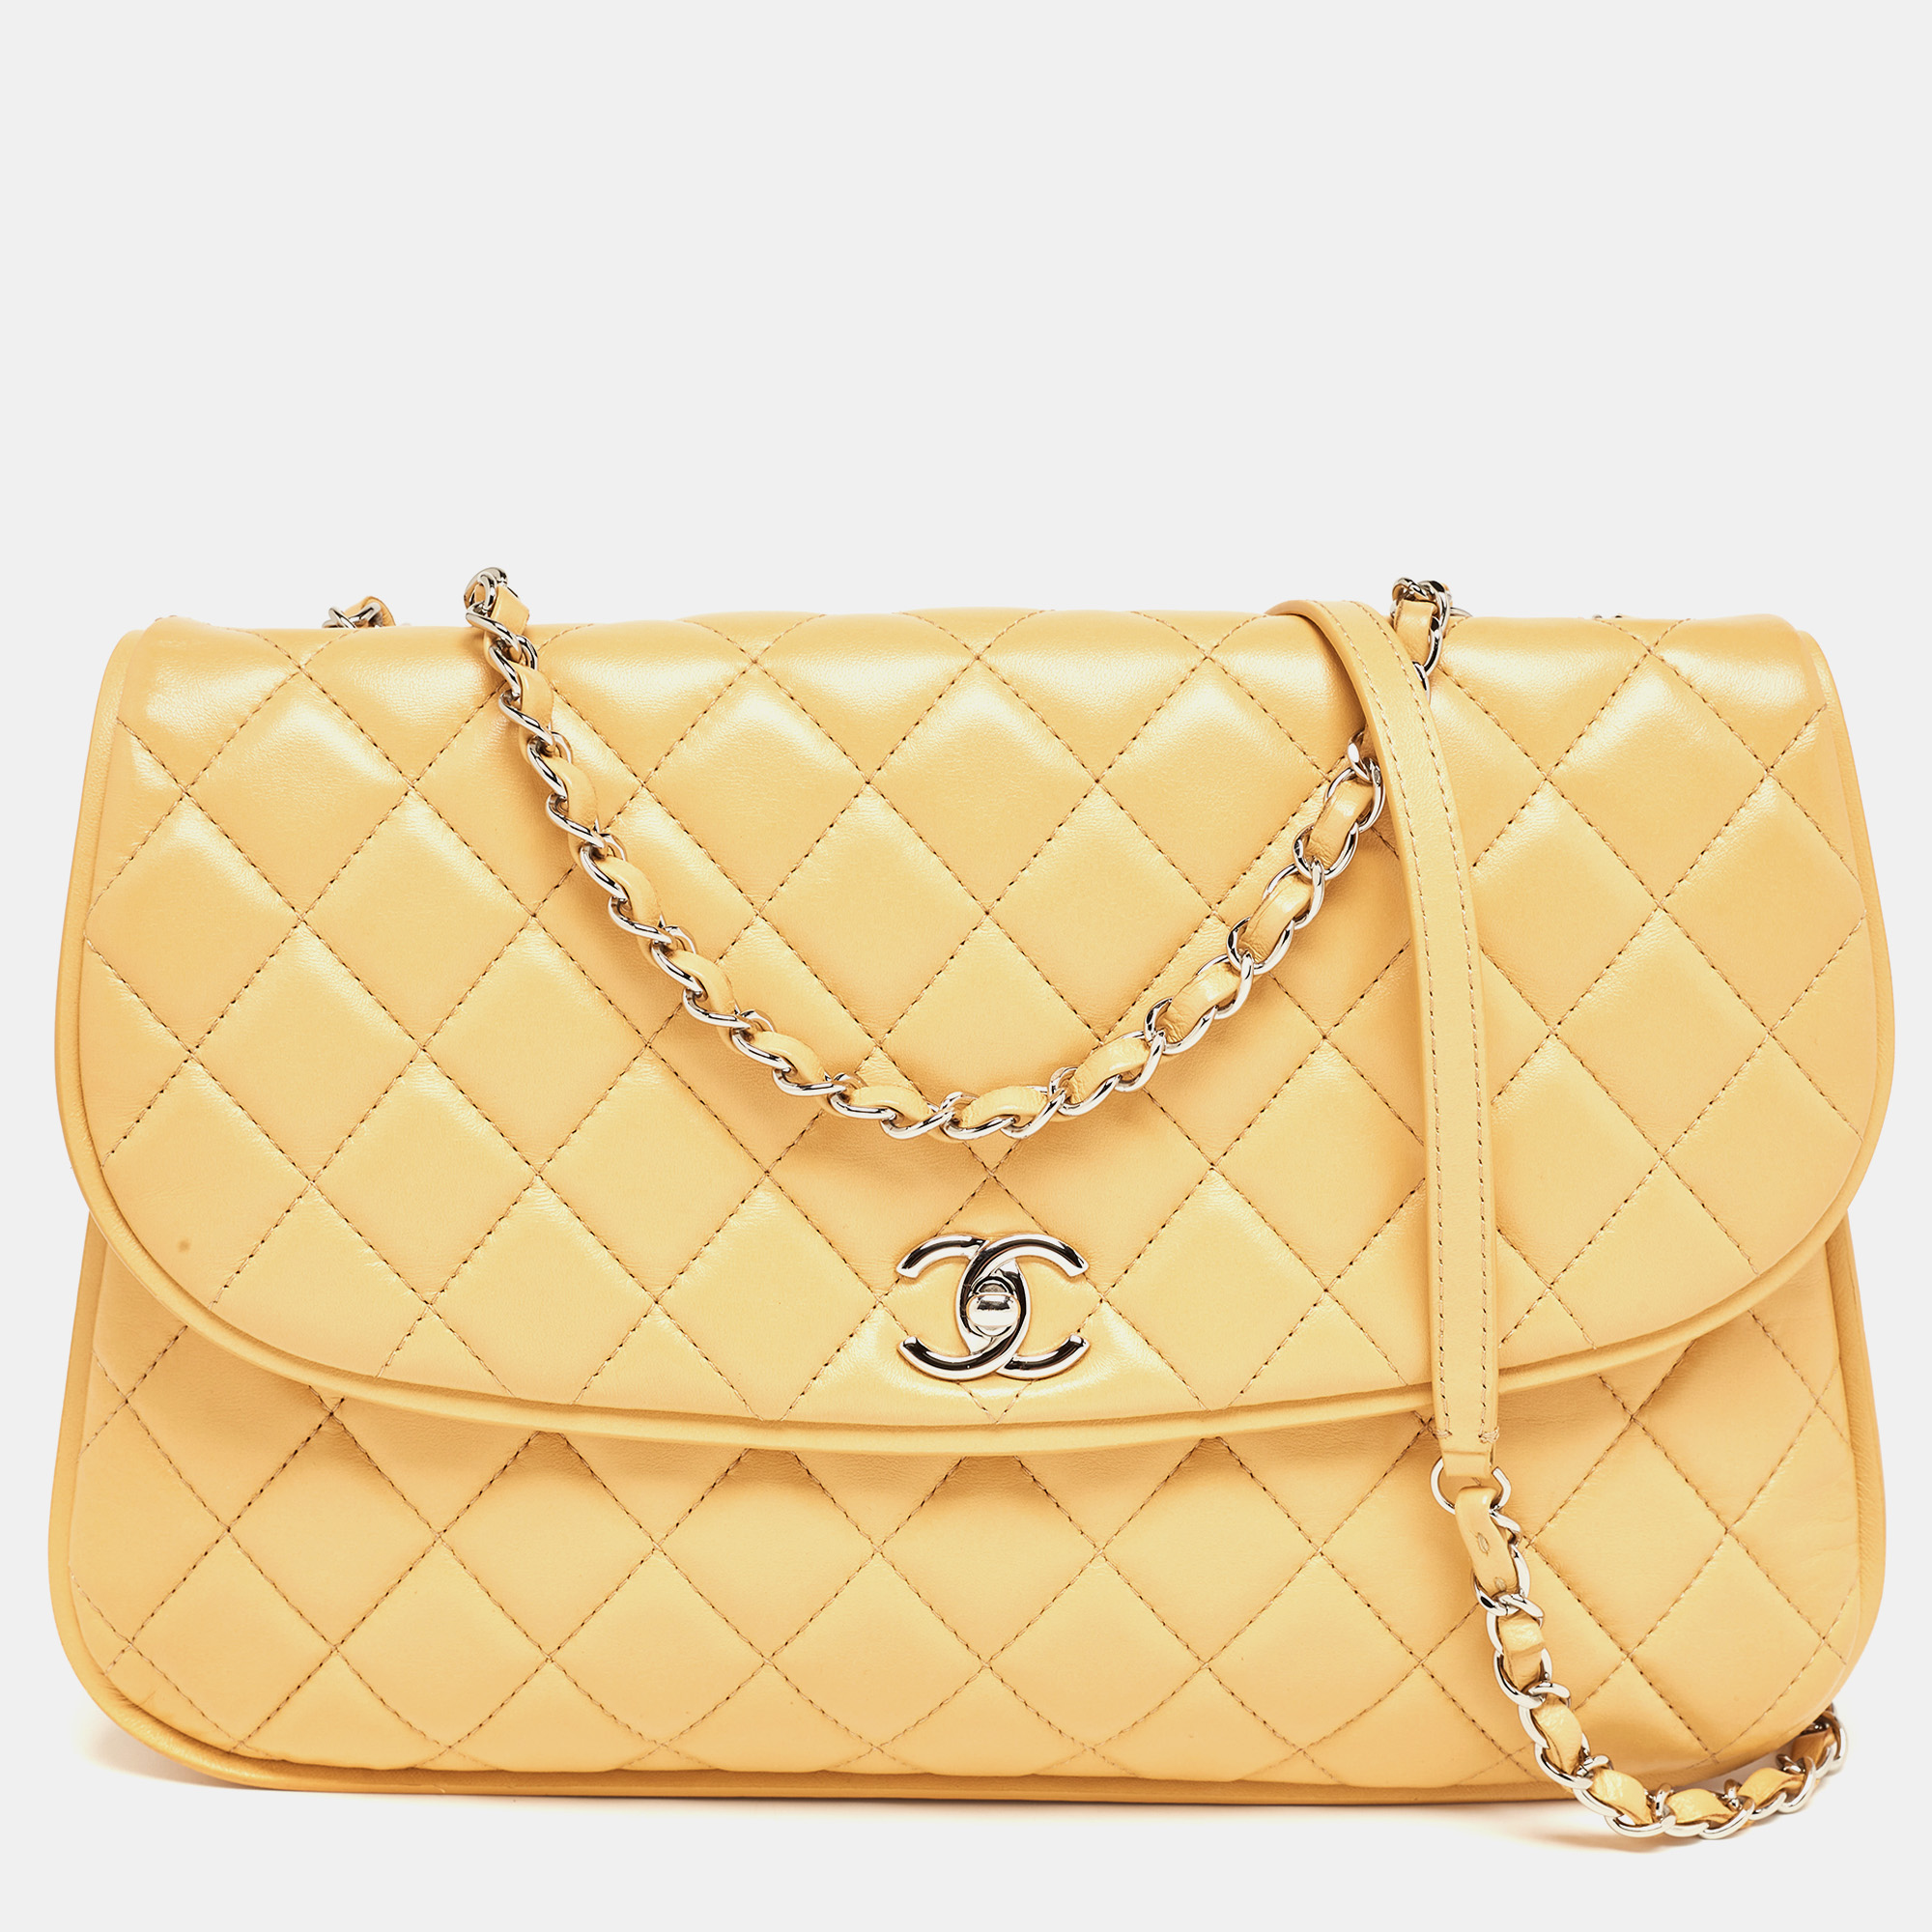 Pre-owned Chanel Yellow Quilted Leather Large Pagode Piping Flap Bag